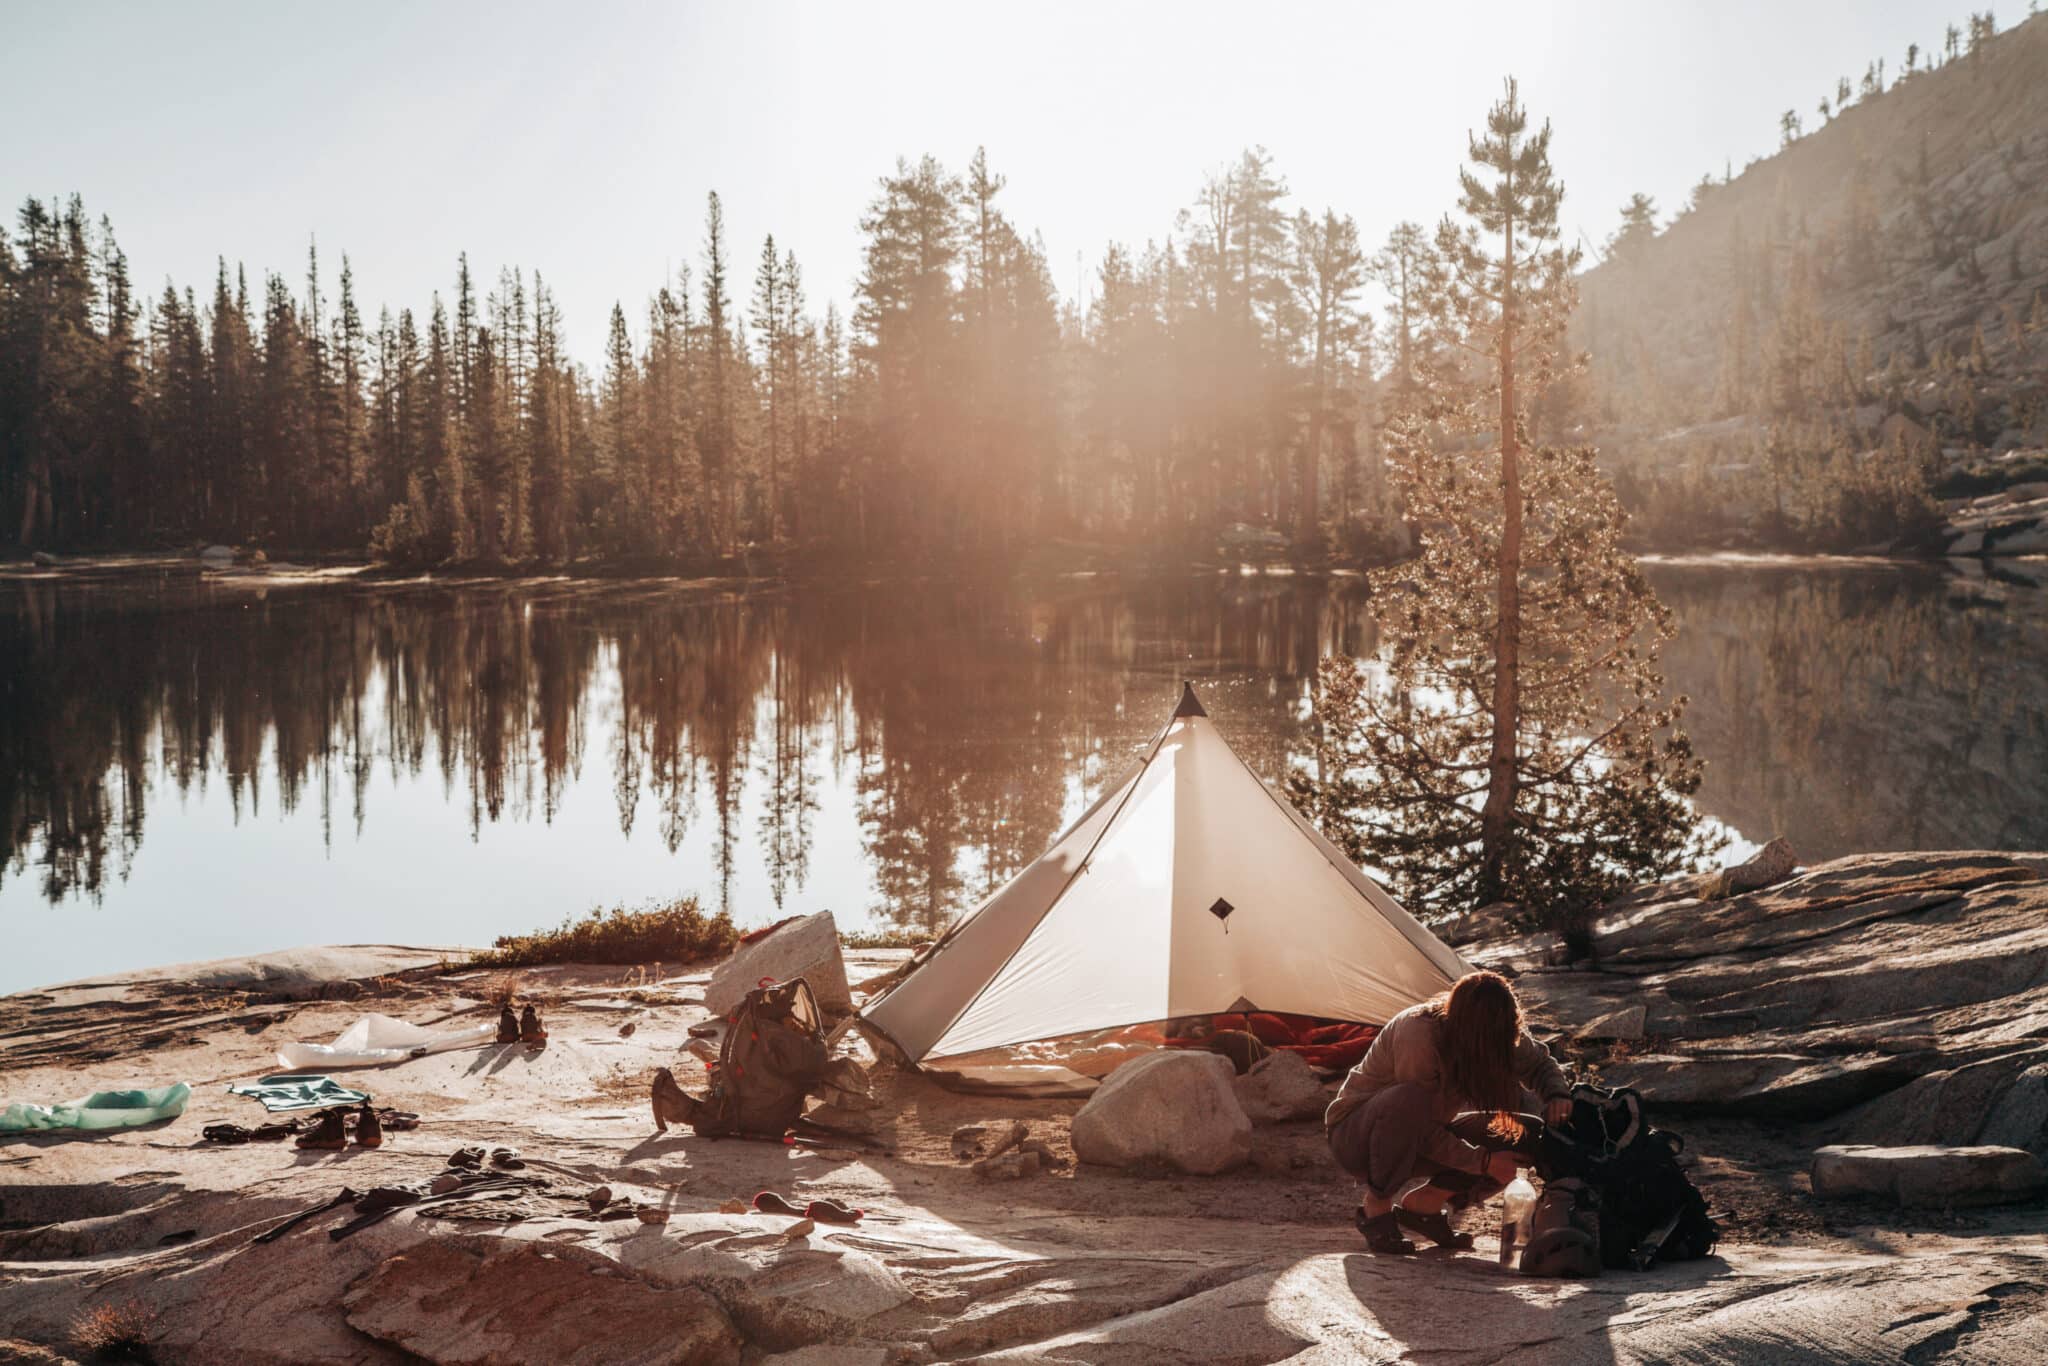 Tent by an alpine lake in Yosemite Wilderness